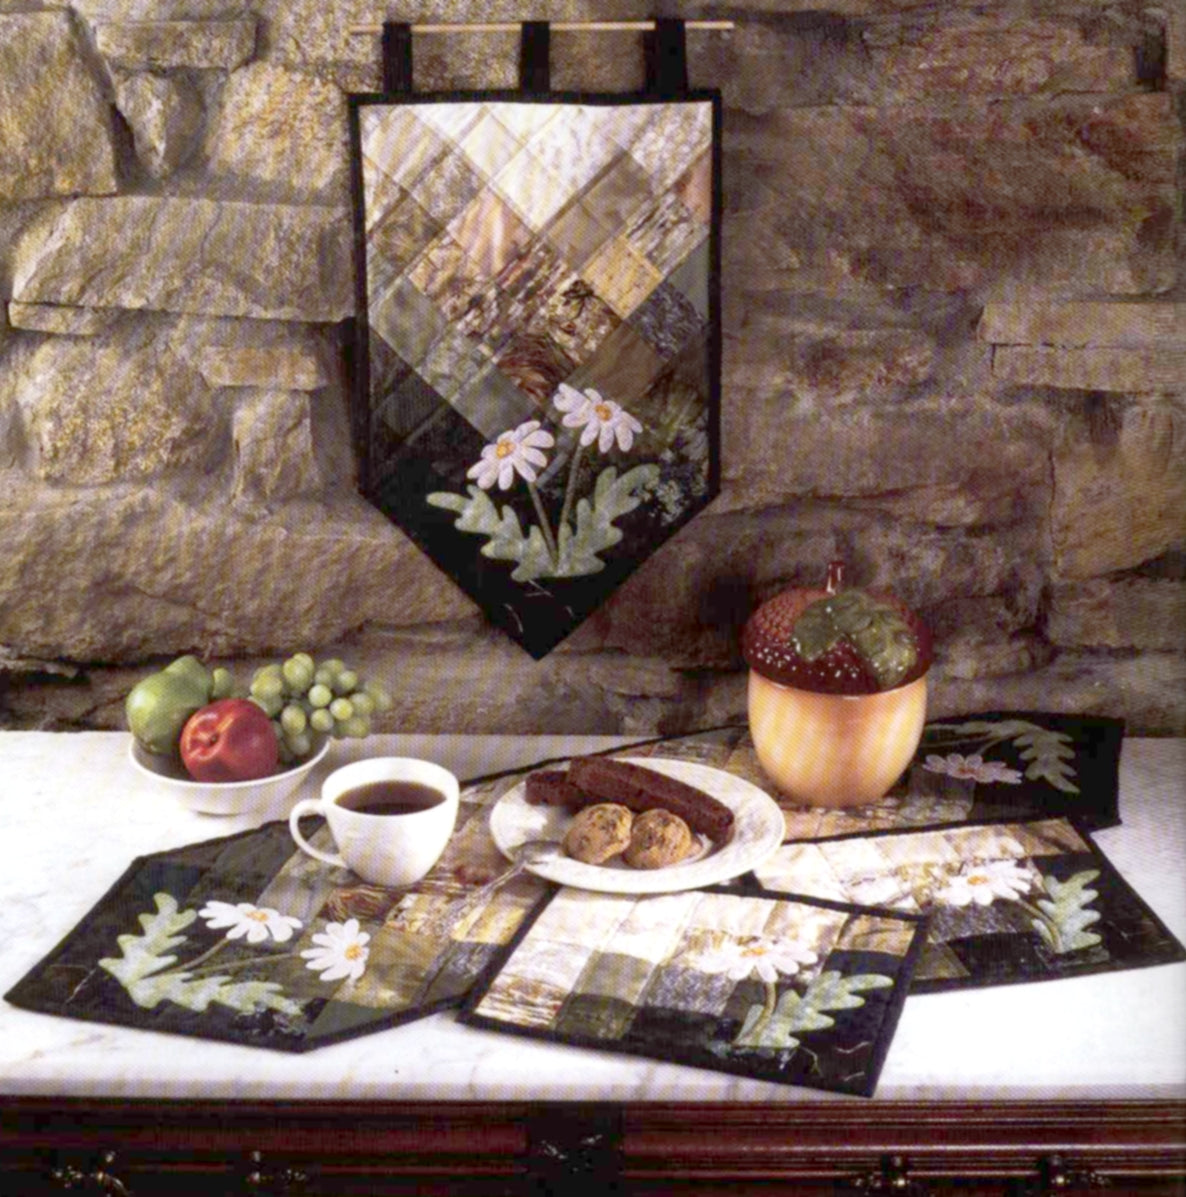 patchwork and applique table runner, placemats and wall hanging quilt pattern for fall. Includes a simple applique daisy design